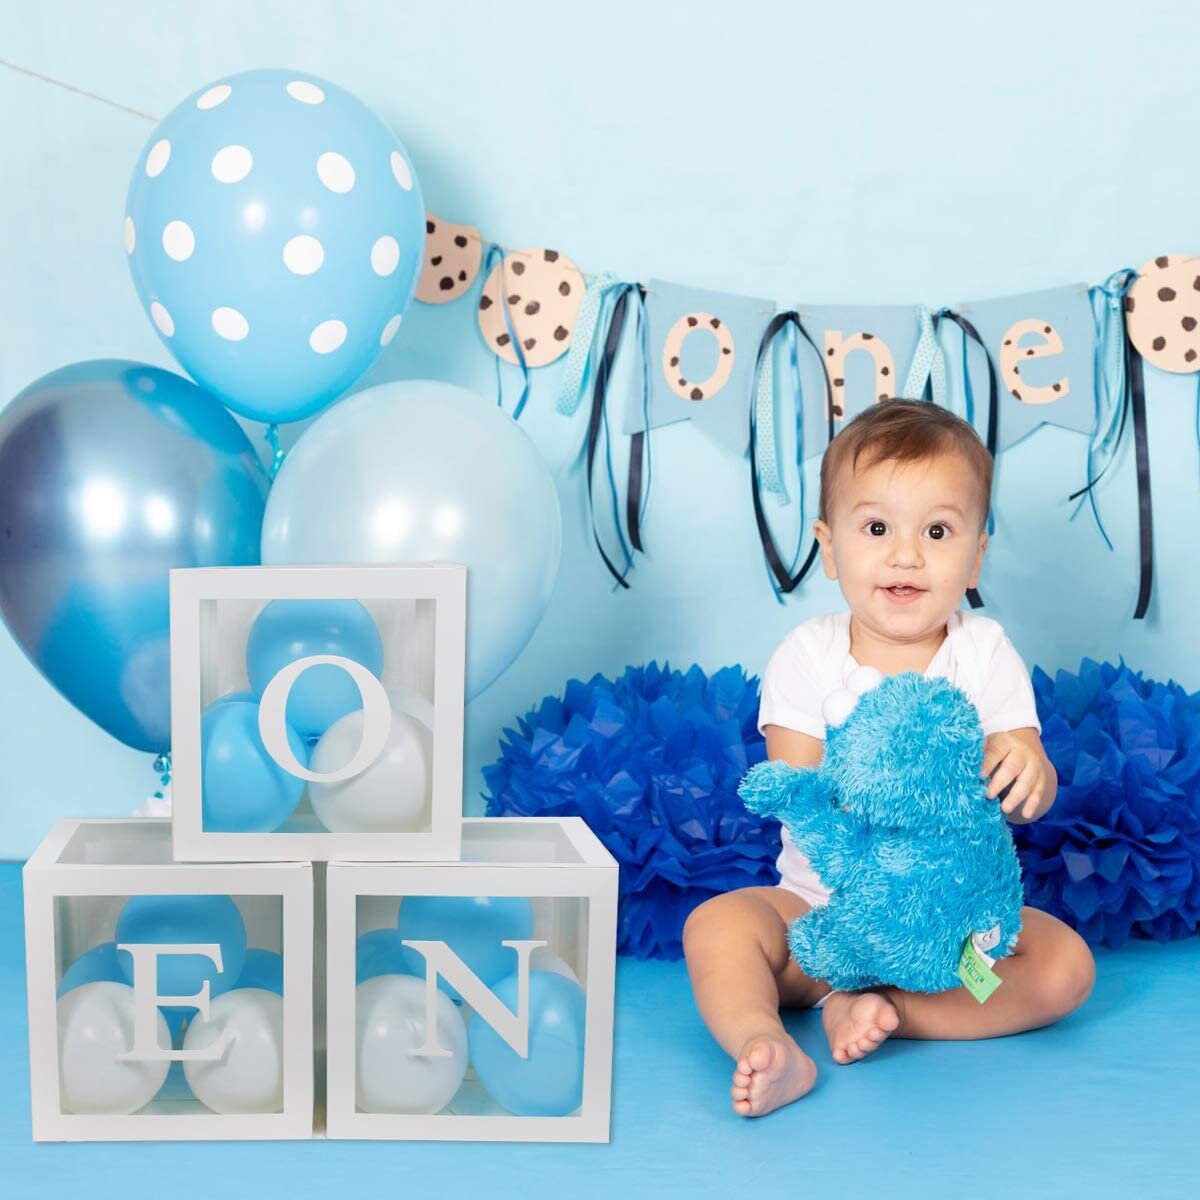 ONE Box, DIY Transparent ONE Boxes for First Birthday Party Decoration –  Party Sharty